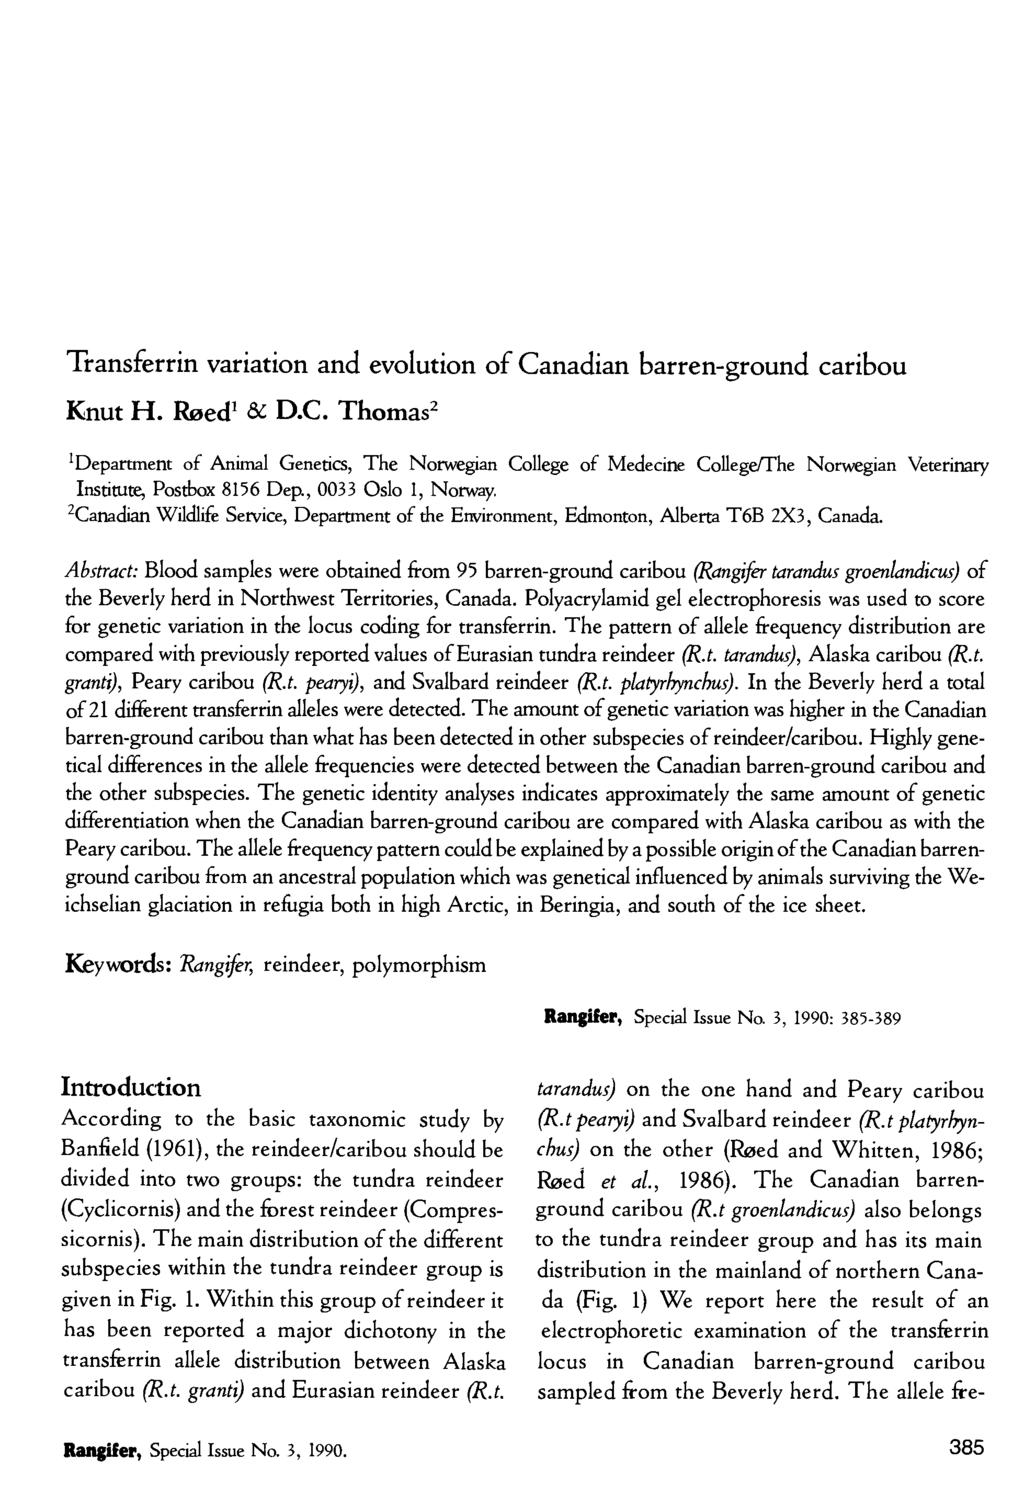 Transferrin variation and evolution of Canadian barren-ground caribou Knut H. Røed 1 & D.C. Thomas 2 'Department of Animal Genetics, The Norwegian College of Medecine College/The Norwegian Veterinary Institute, Postbox 8156 Dep.